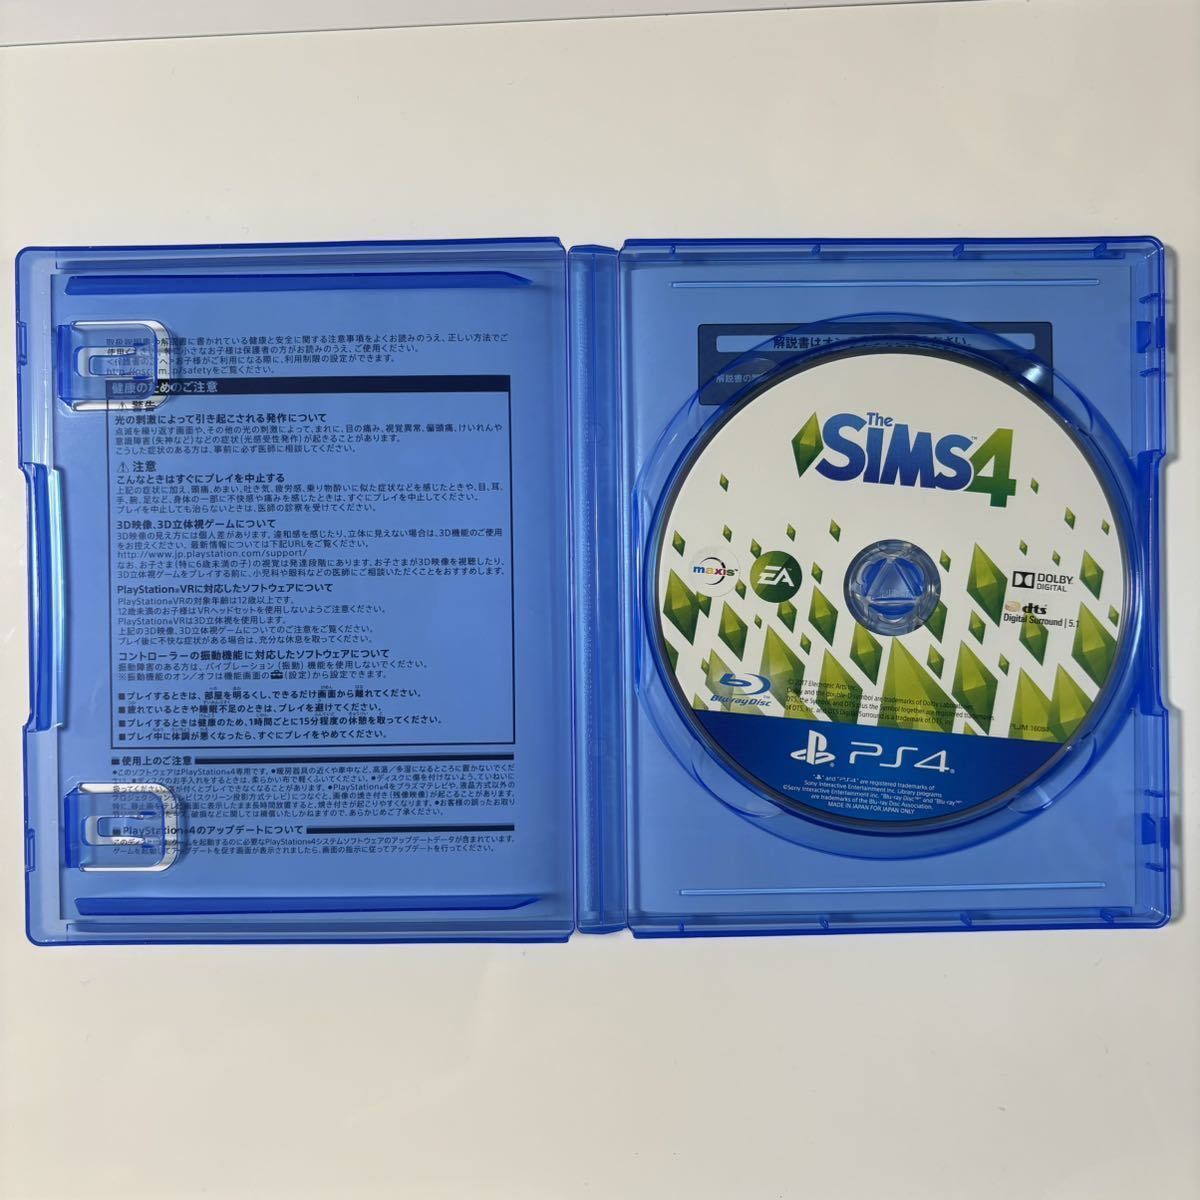 【PS4】 The Sims 4 ザ シムズ4 プレステ4 PS4ソフト Deluxe Party Edition ★動作確認済★送料無料★匿名配送★即決★